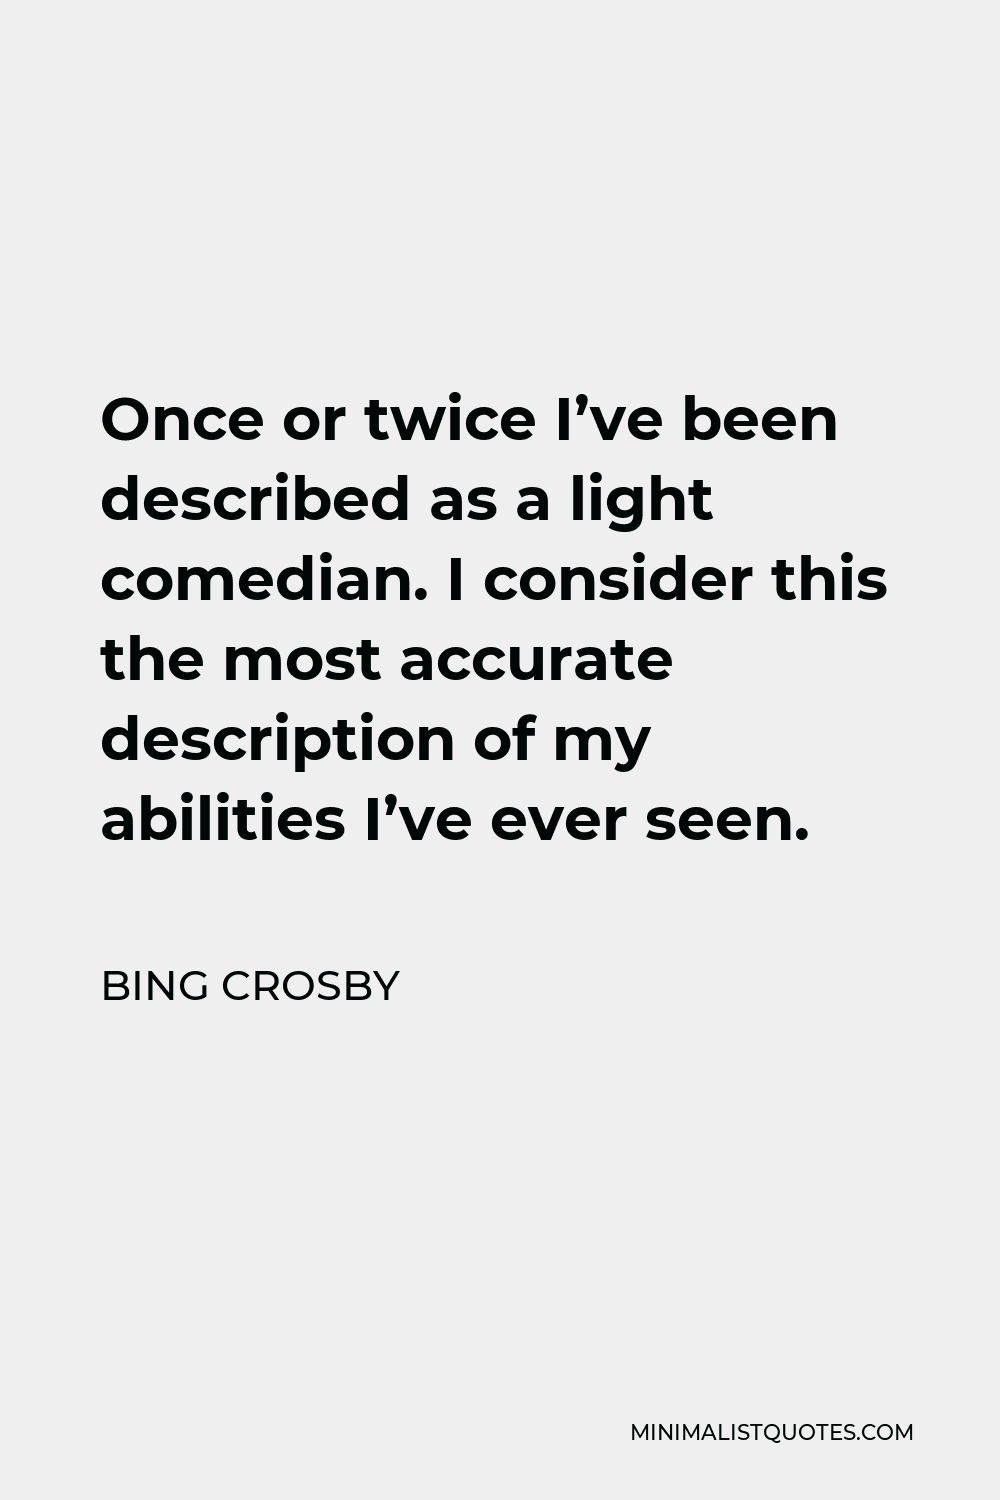 Bing Crosby Quote - Once or twice I’ve been described as a light comedian. I consider this the most accurate description of my abilities I’ve ever seen.